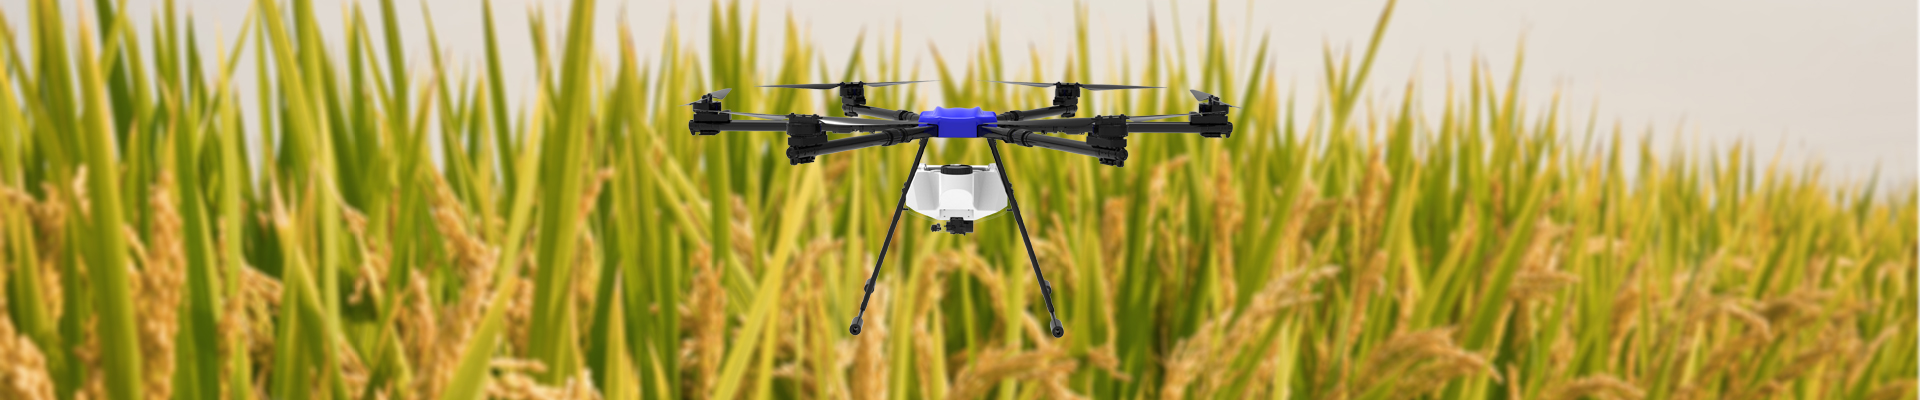 F22 Electricity Agricultural drone